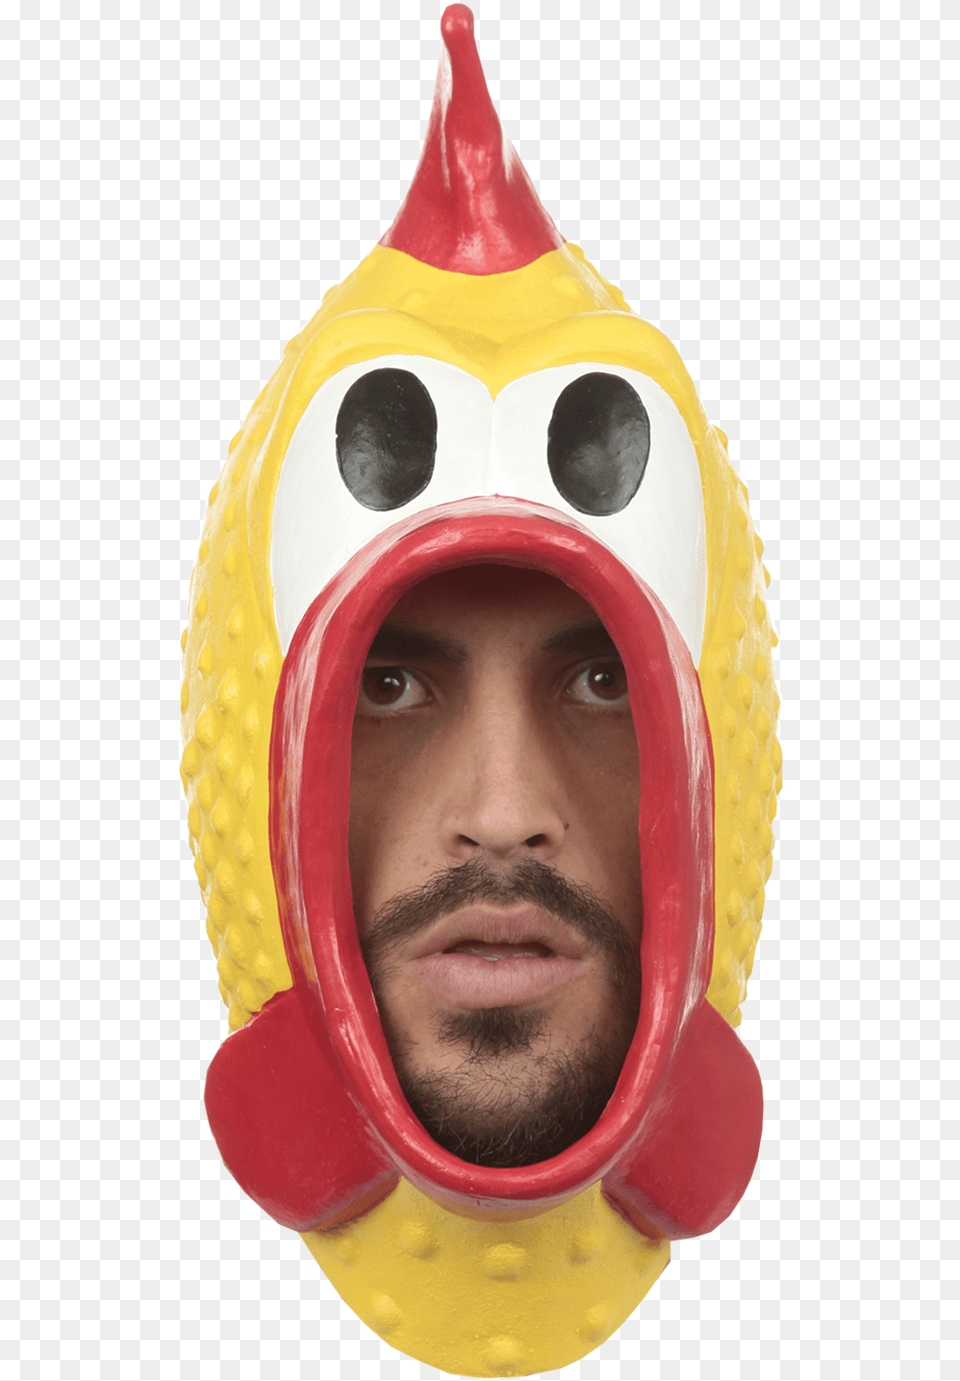 Rubber Chicken Rubber Chicken Mask, Helmet, Clothing, Hat, Cap Free Png